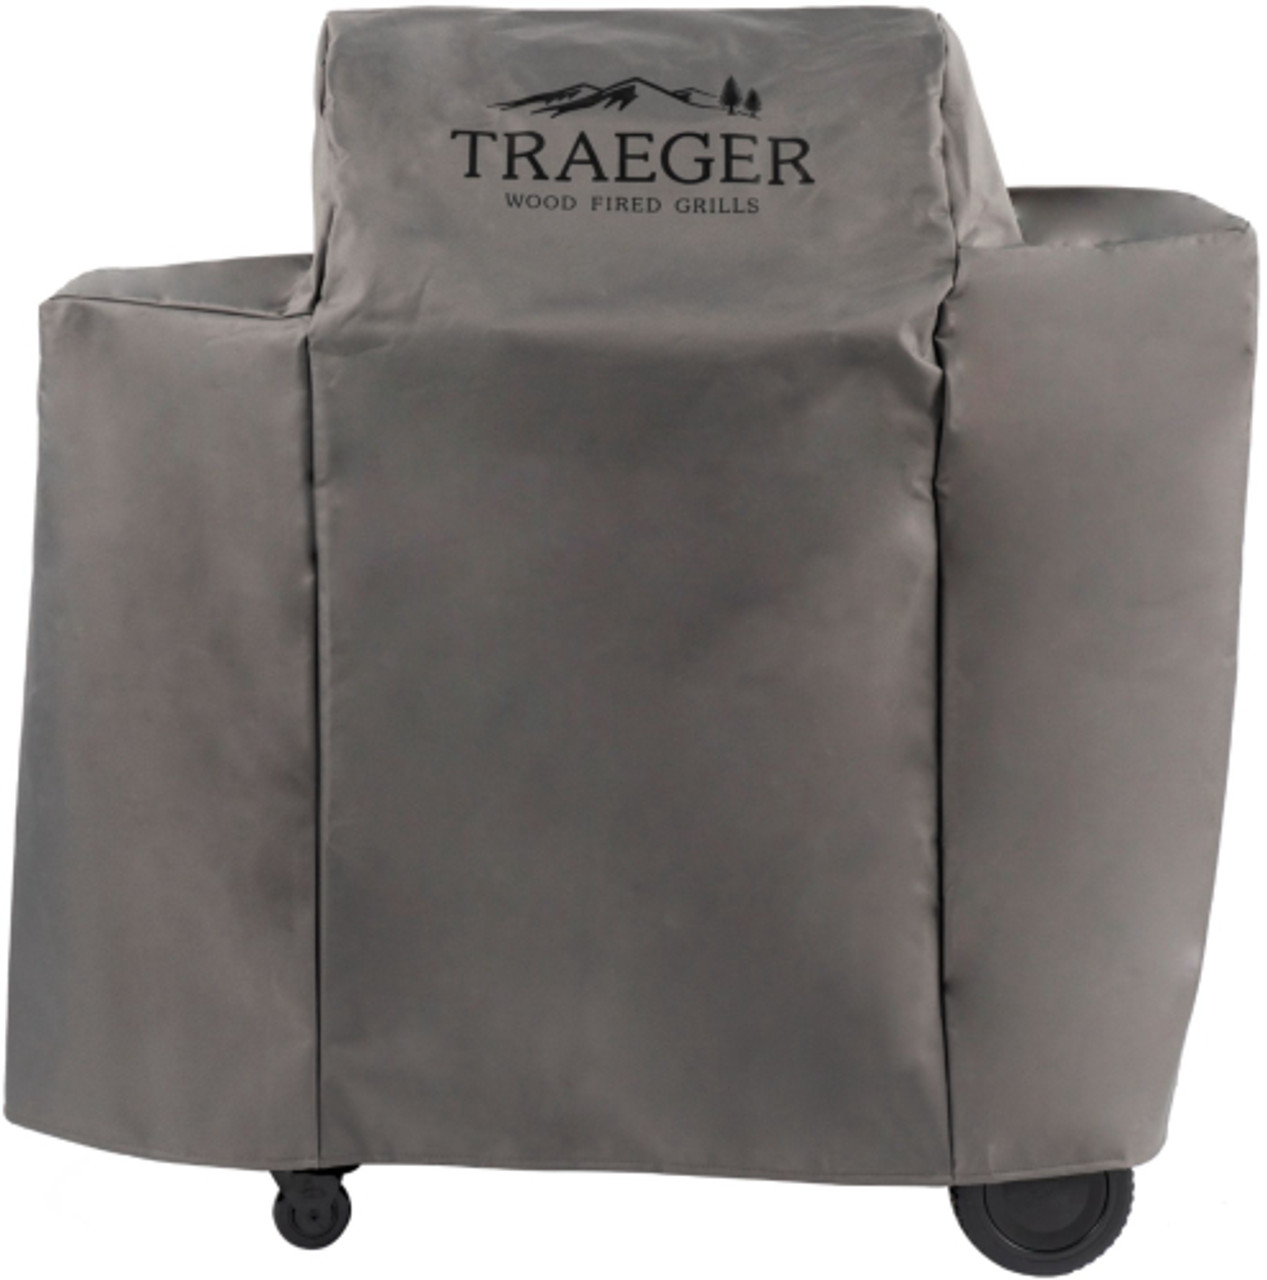 Traeger Grills - Full-Length Grill Cover - Ironwood 650 - Gray